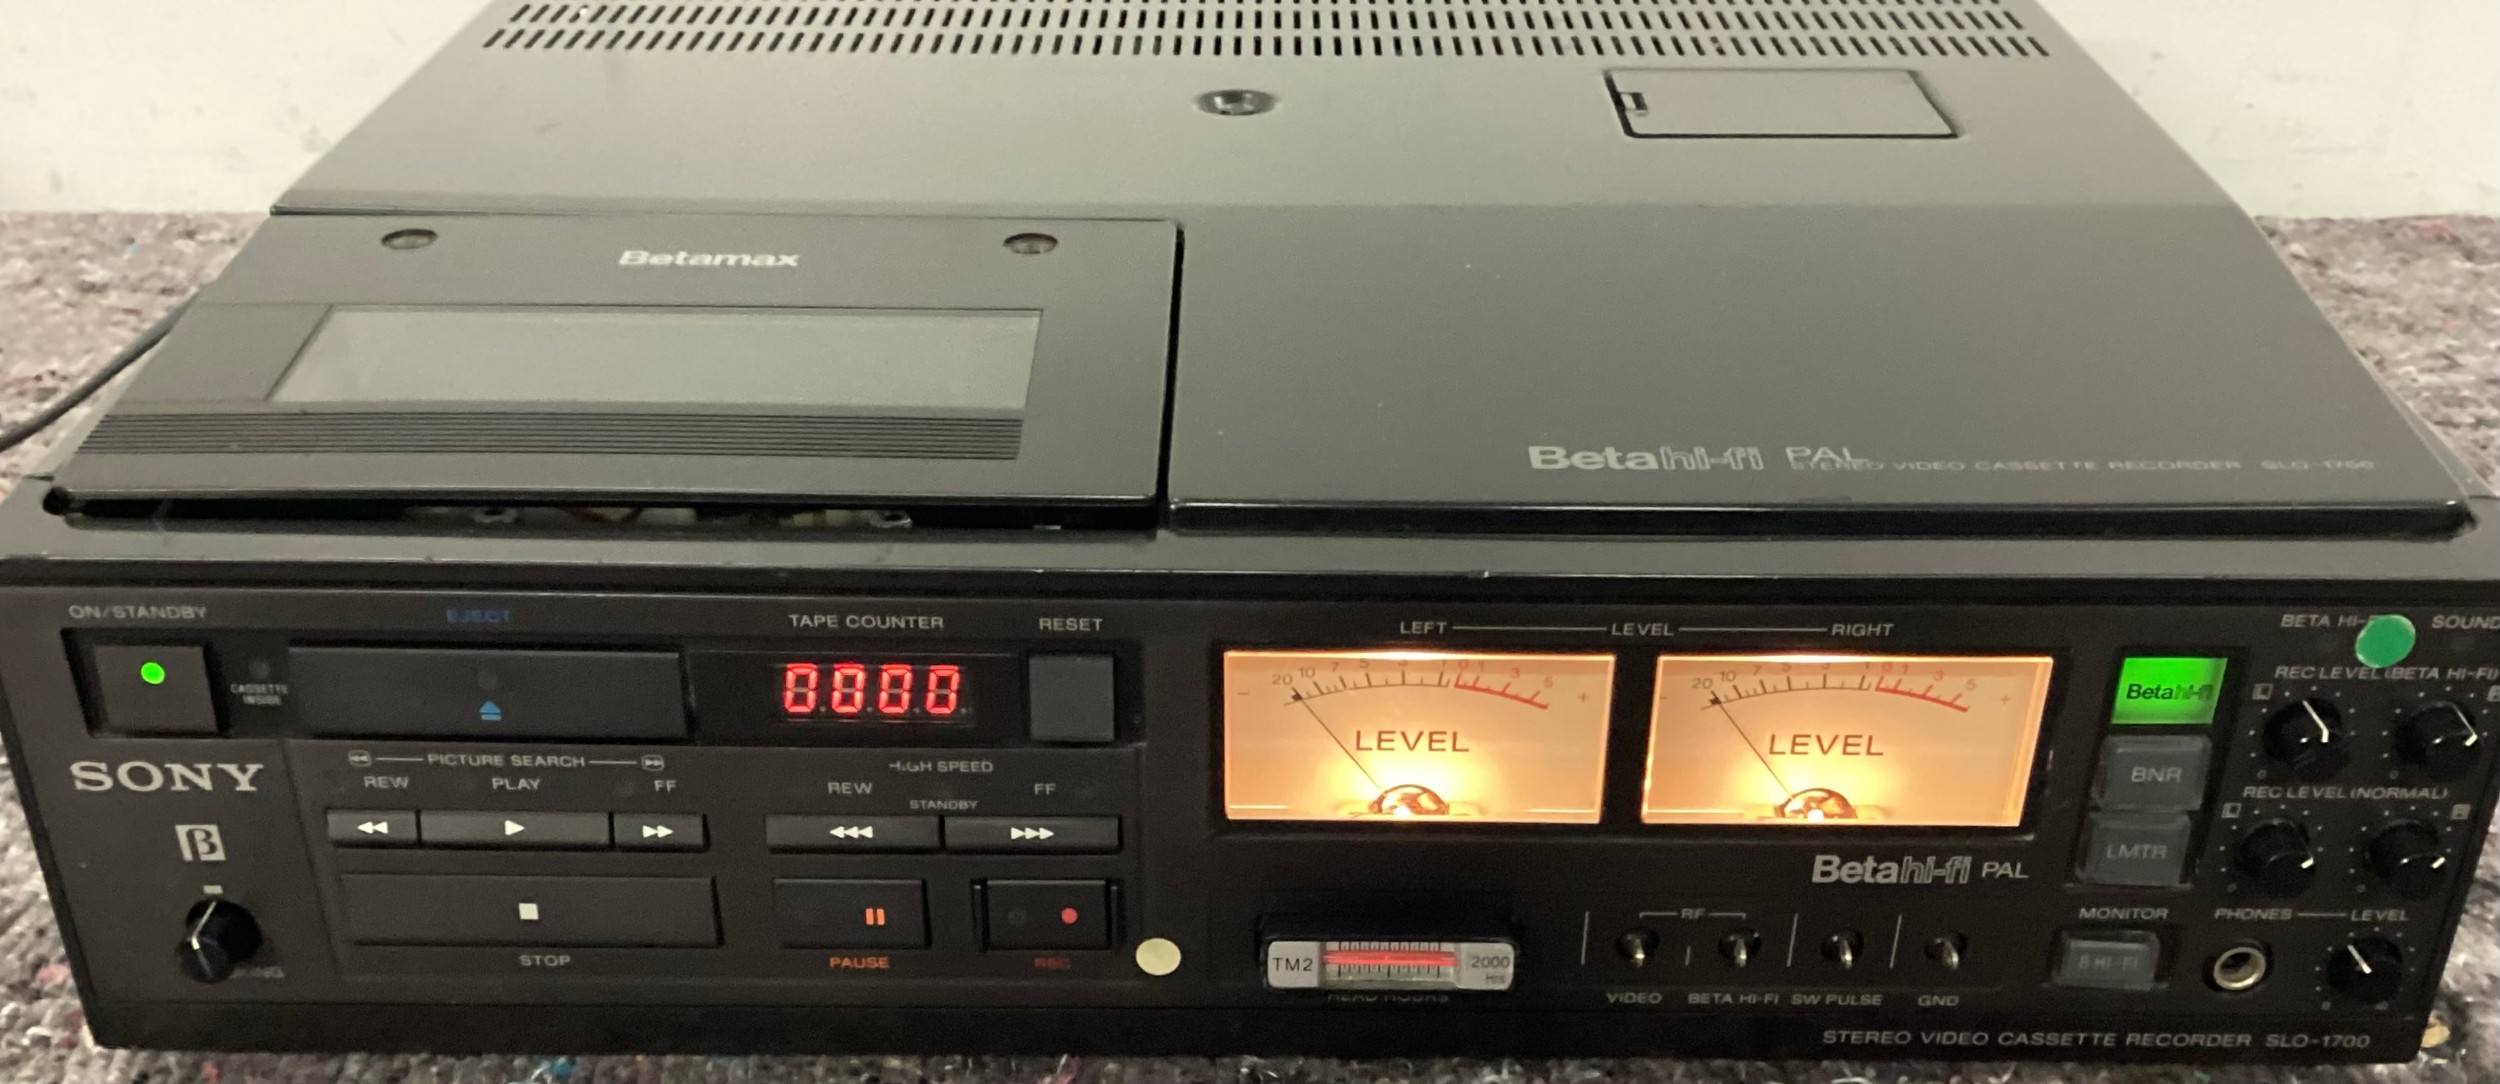 SONY BETA HIFI VIDEO CASSETTE RECORDER. Nice professional Pal stereo cassette recorder found here